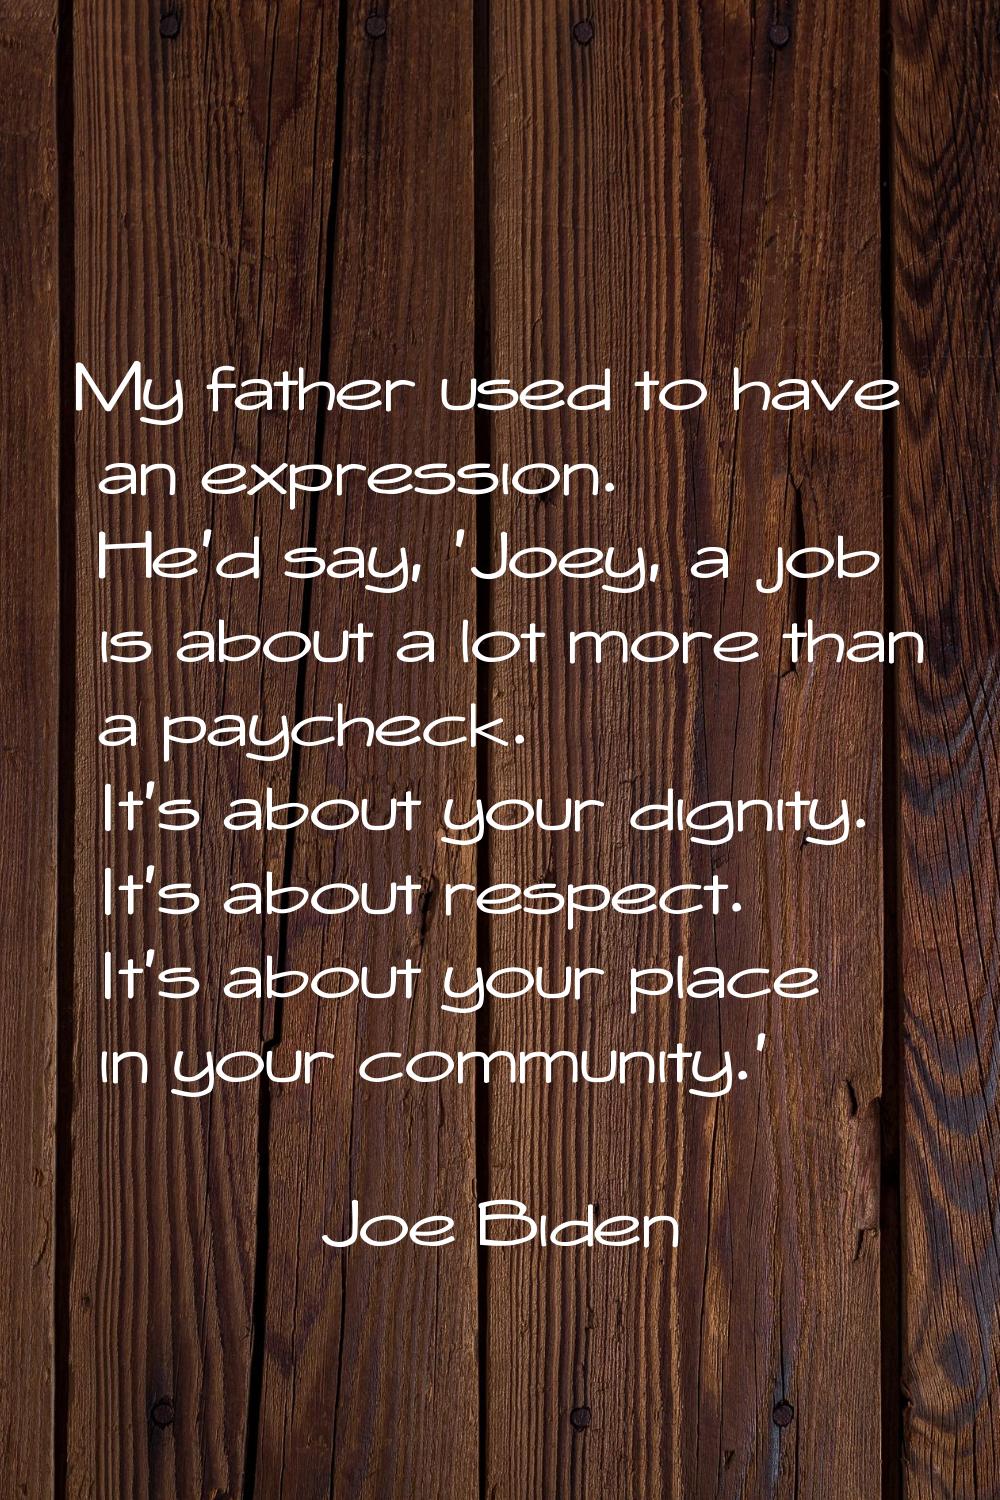 My father used to have an expression. He'd say, 'Joey, a job is about a lot more than a paycheck. I